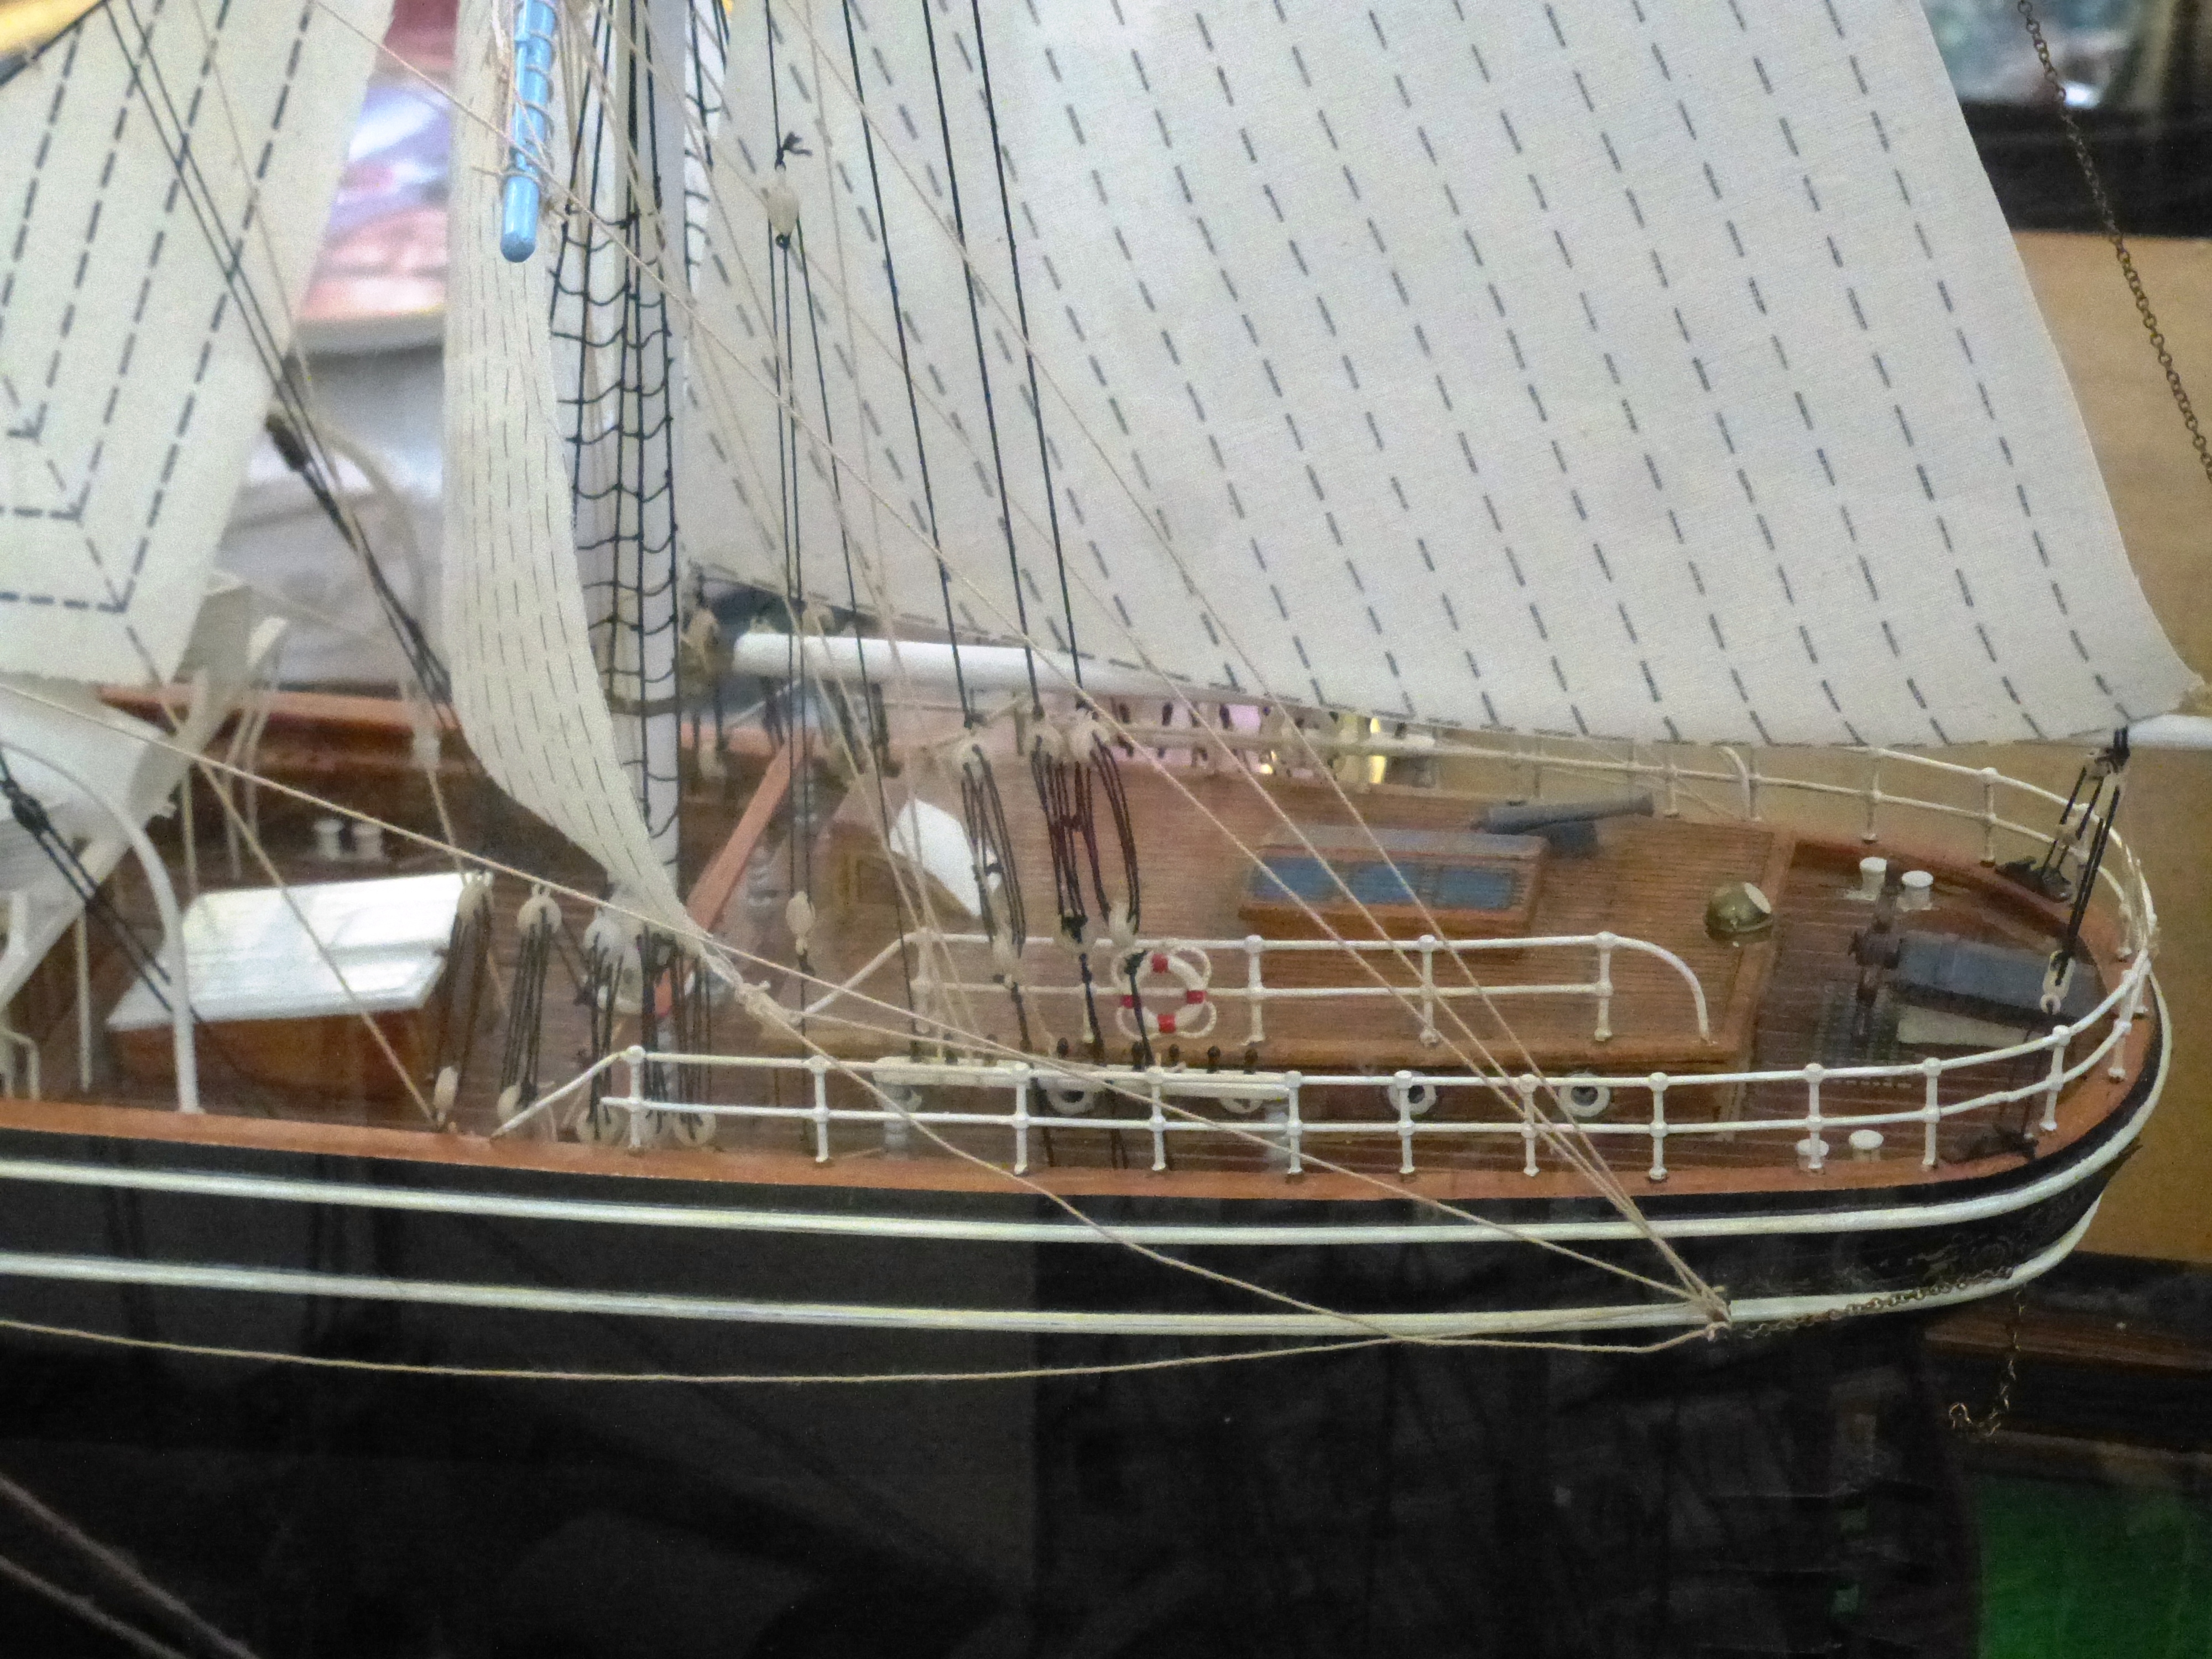 LARGE MODEL CUTTY SARK BOAT IN DISPLAY CASE - Image 4 of 4